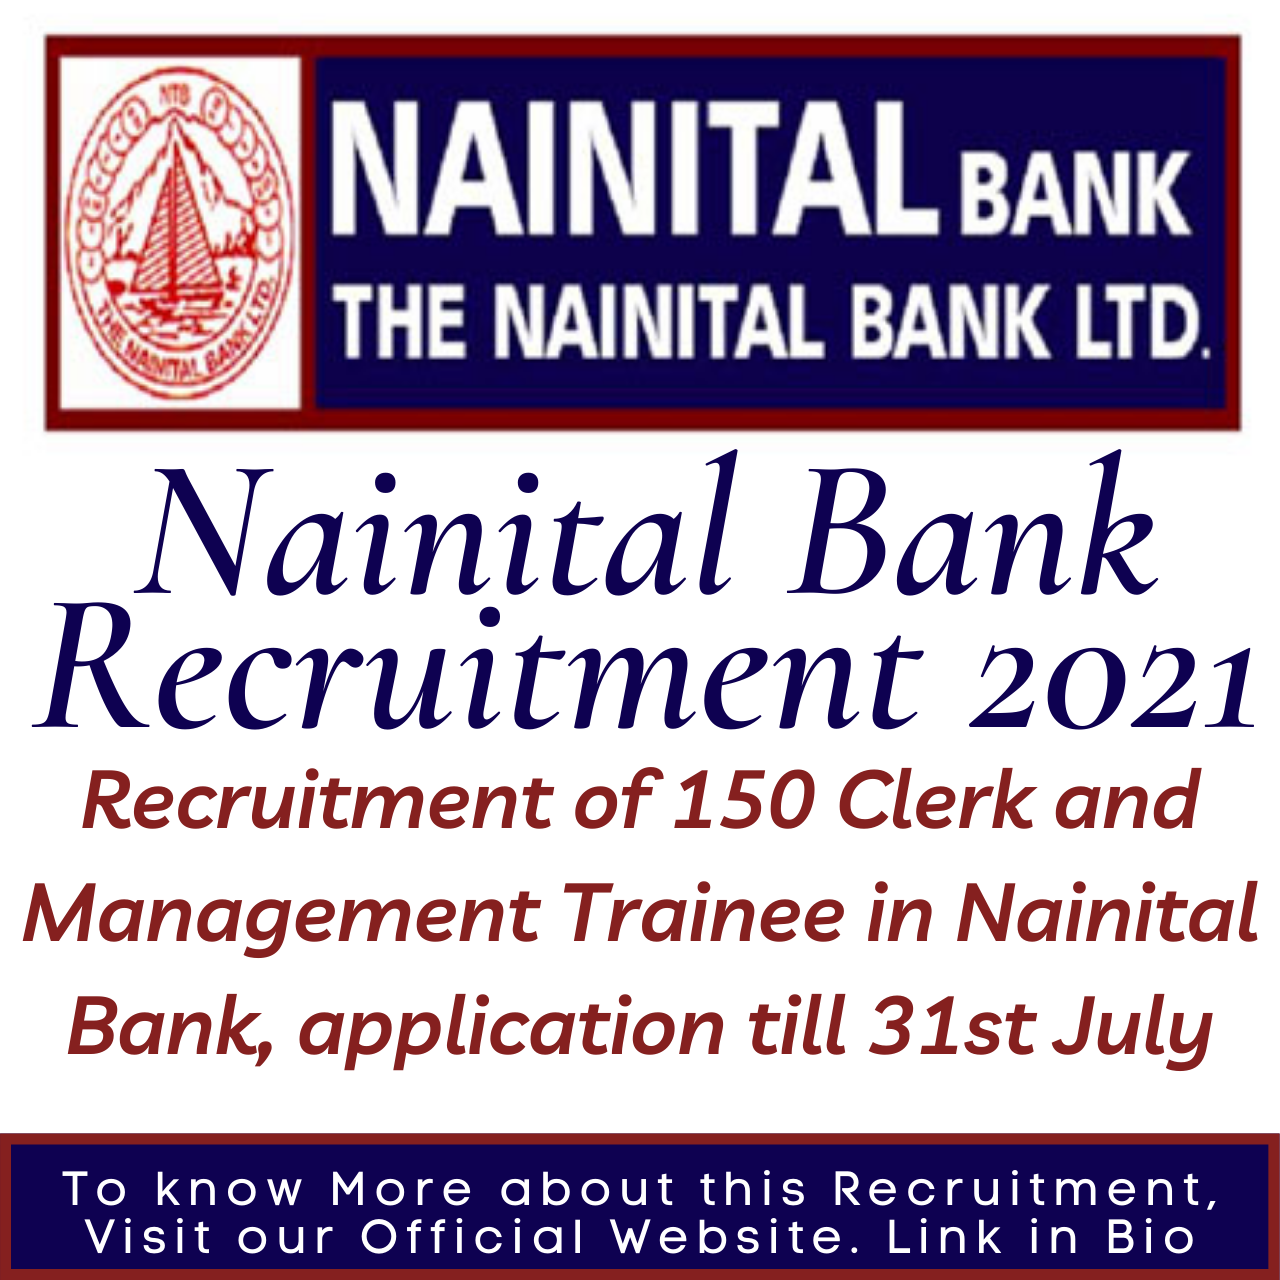 Nainital Bank Recruitment 2021: Recruitment of 150 Clerk and Management Trainee in Nainital Bank, application till 31st July